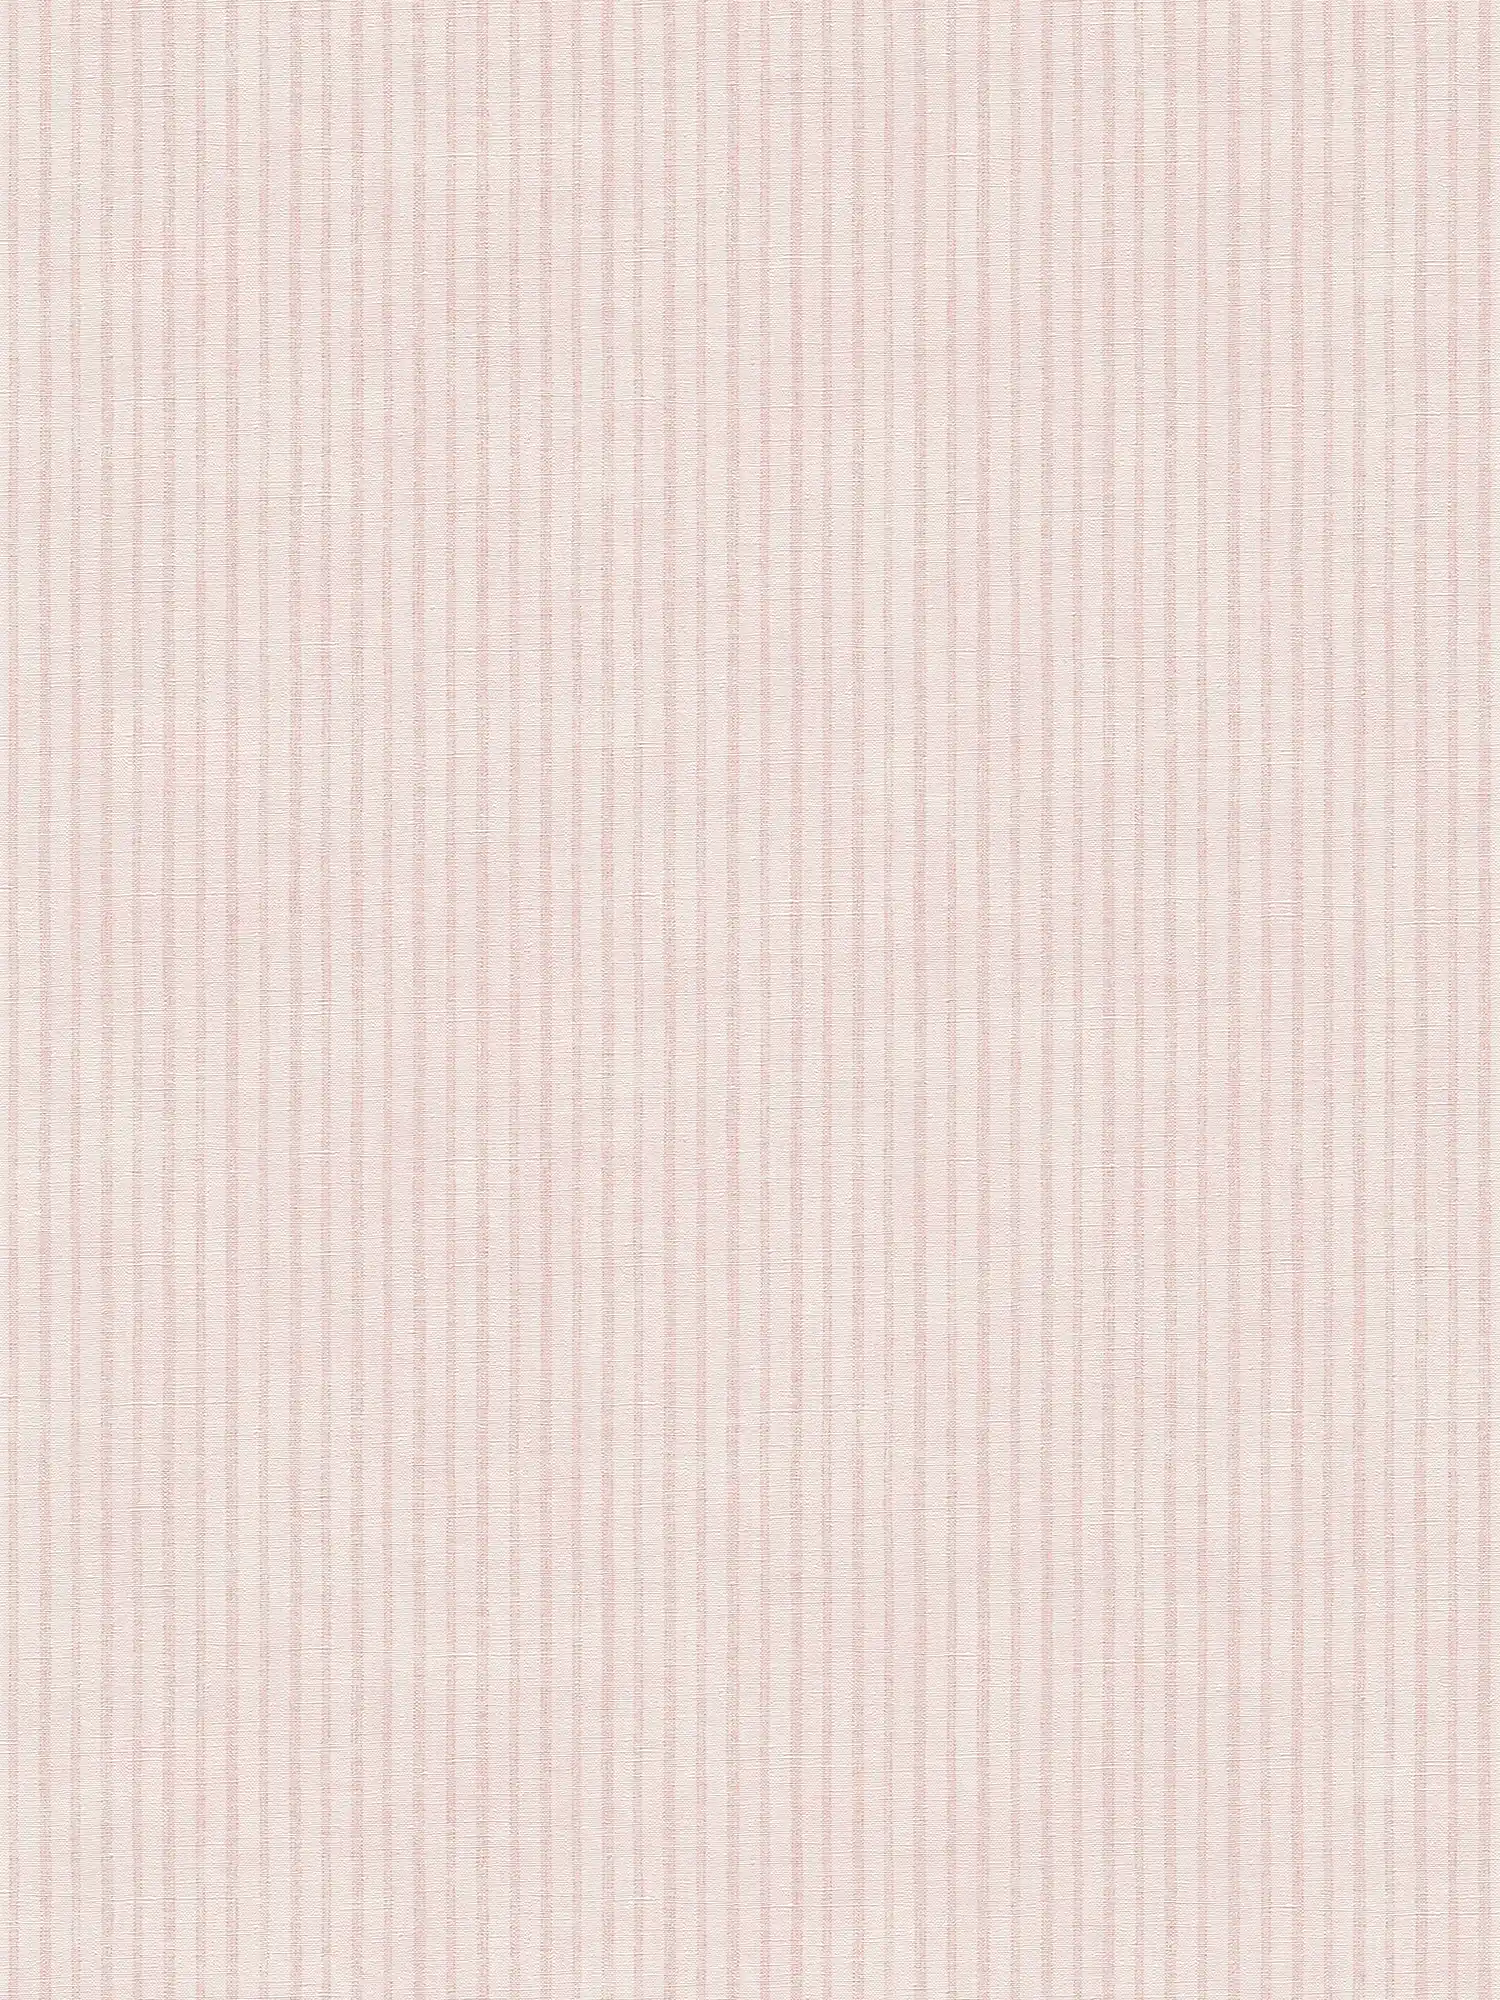 Country style striped wallpaper - cream, pink
